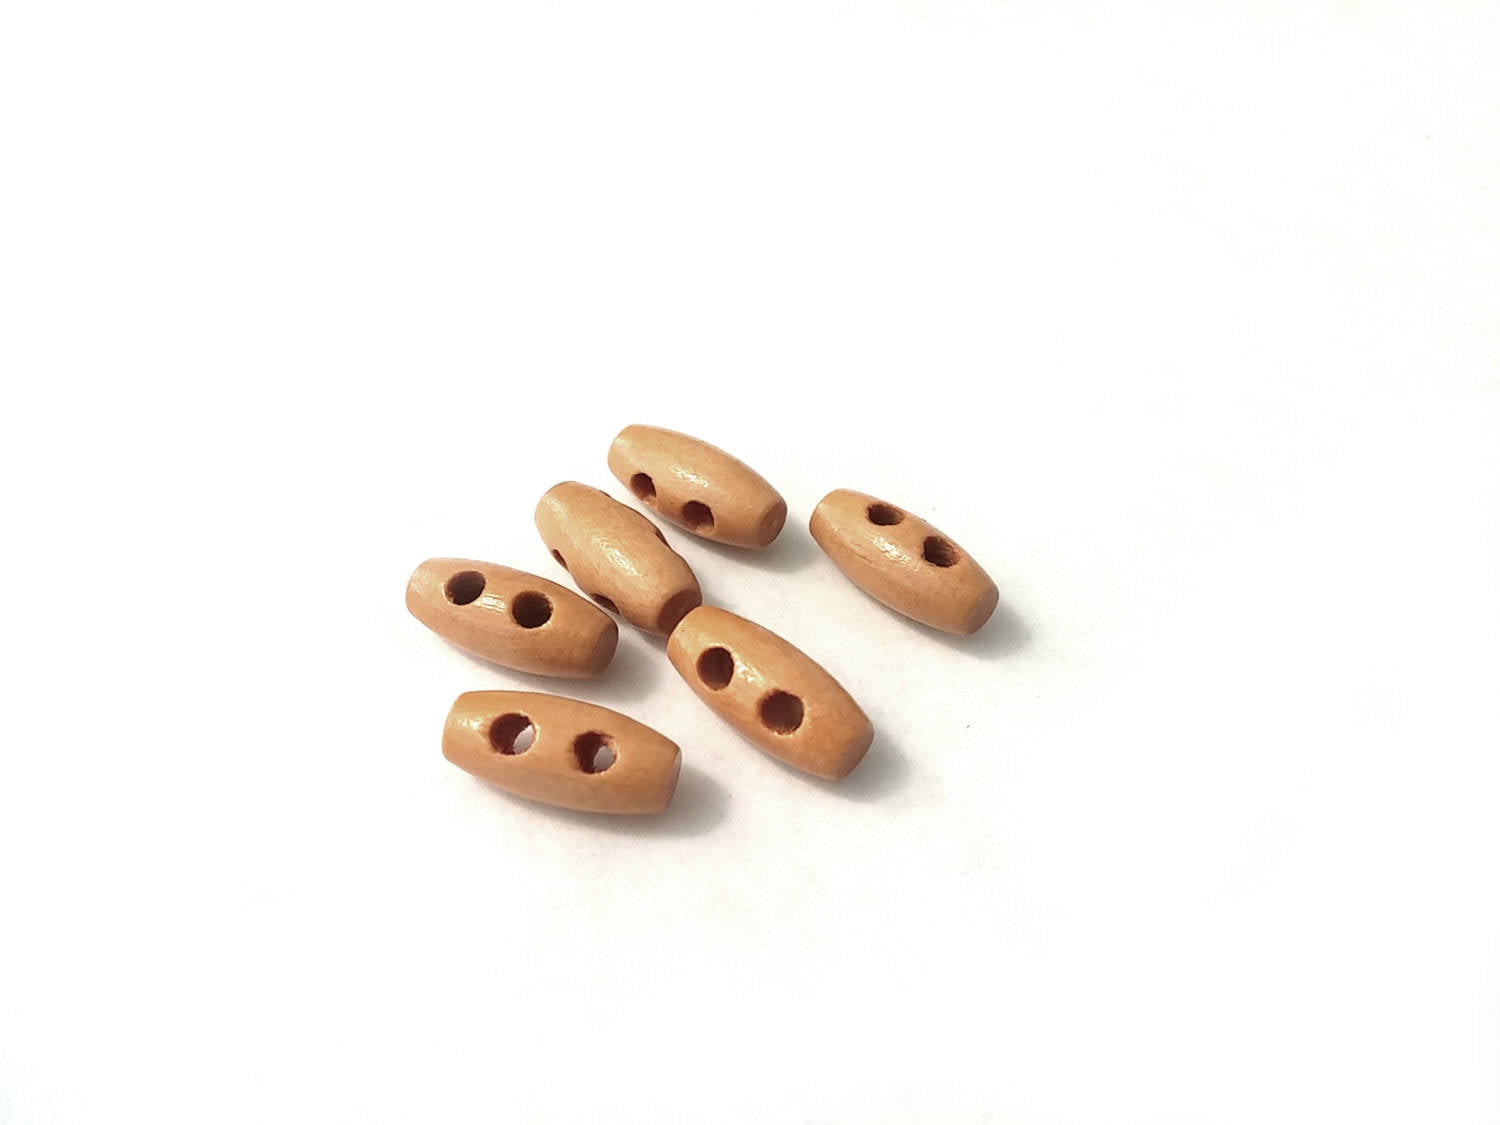 2 Large Toggle Buttons - Wood Dark Brown, Black 6cm (2 3/8)